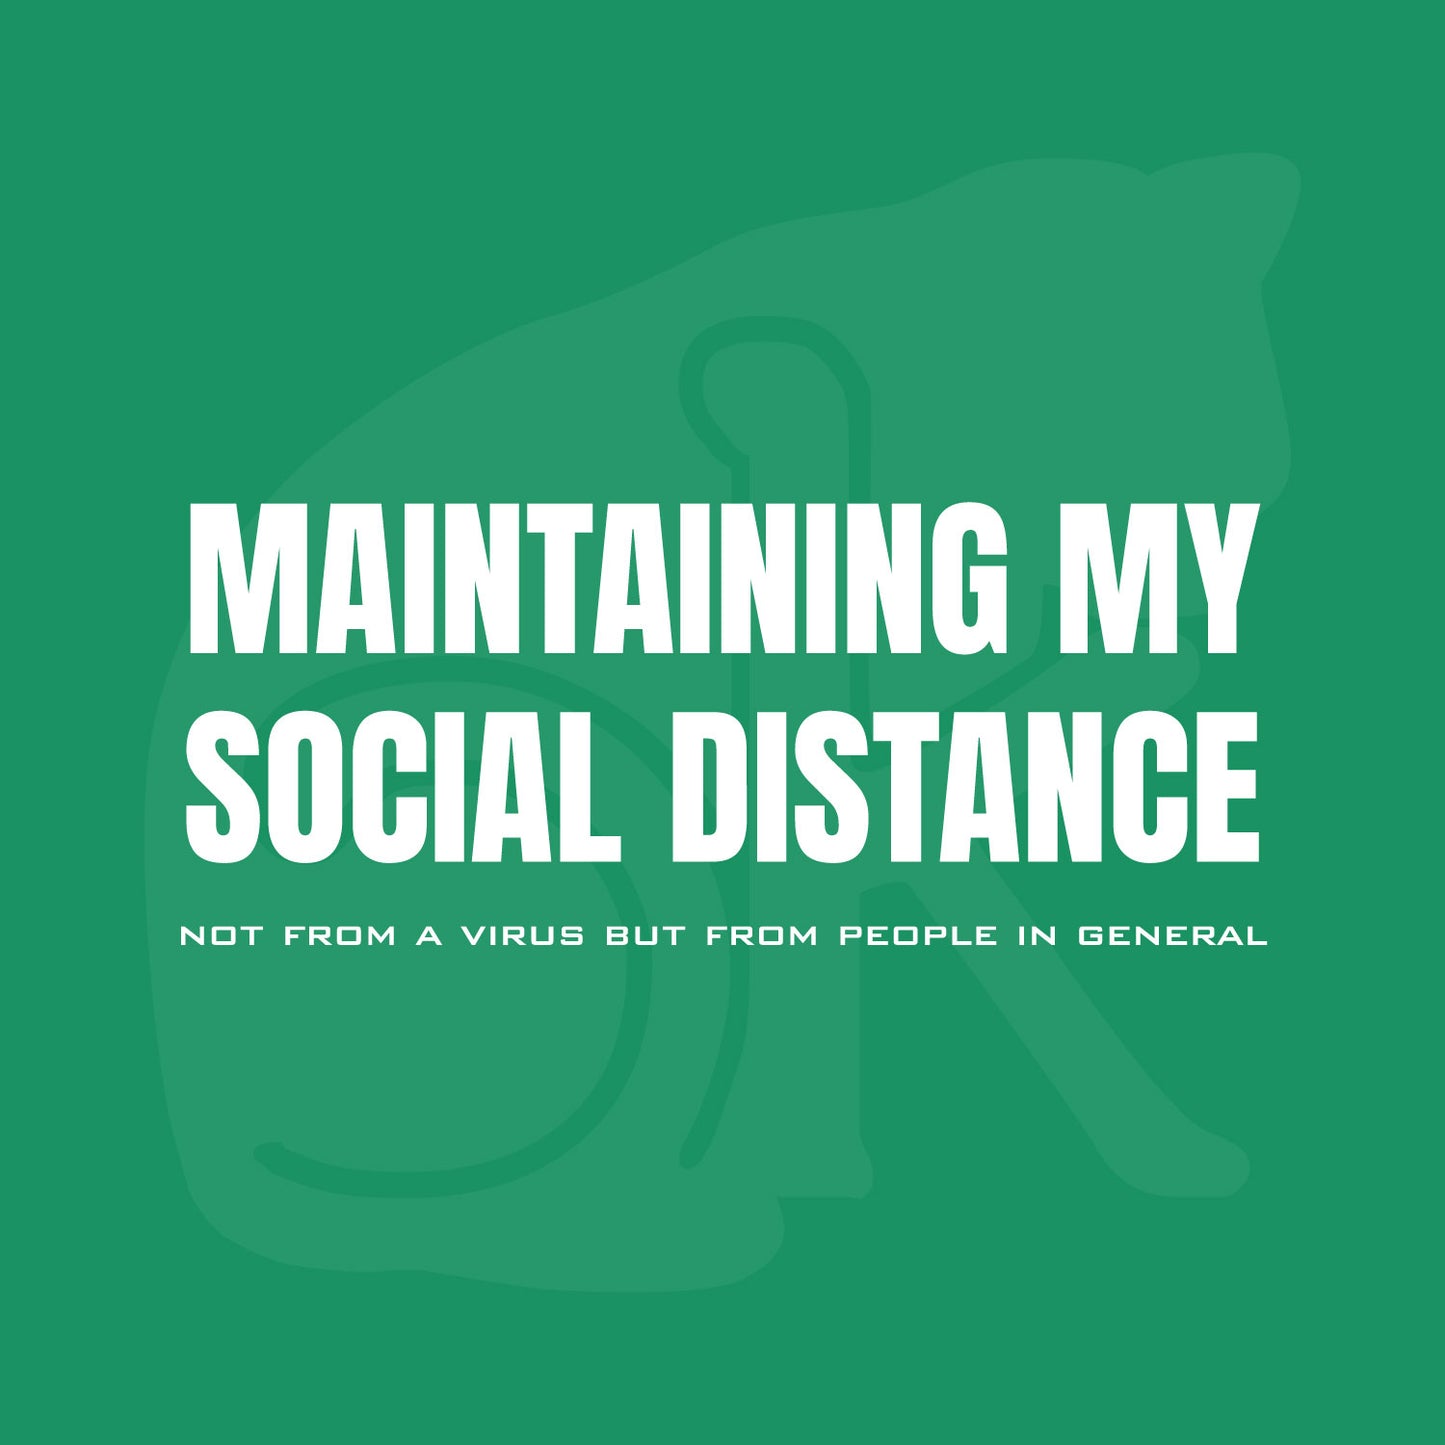 Standalone watermarked graphic: "MAINTAINING MY SOCIAL DISTANCE not from a virus but from people in general"